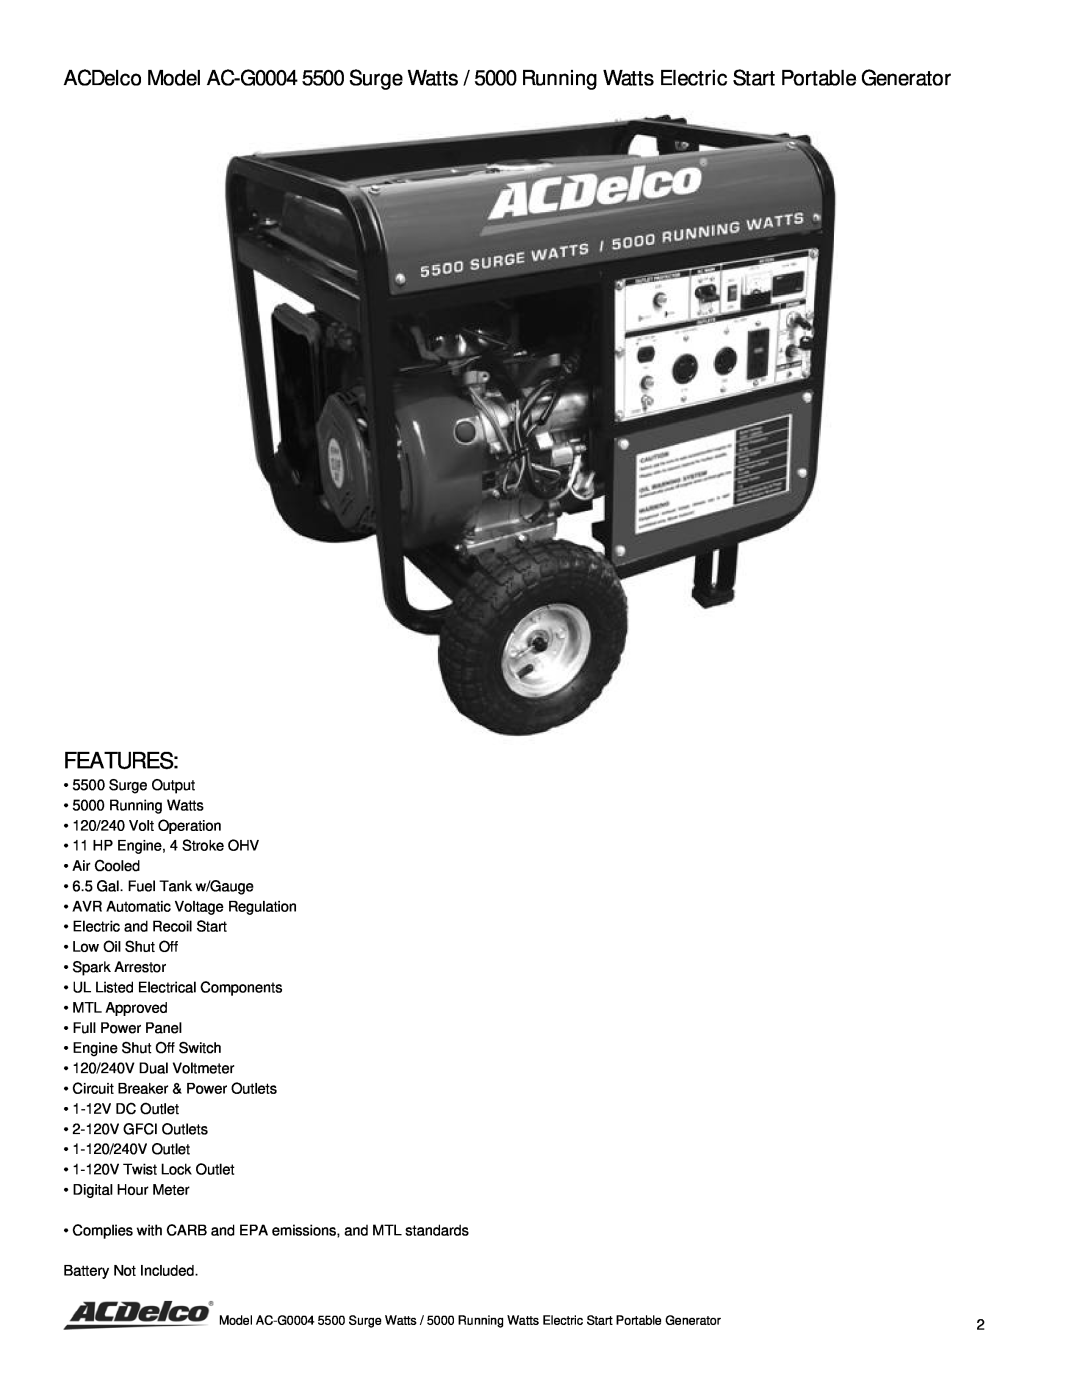 ACDelco AC-G0004 instruction manual Features 